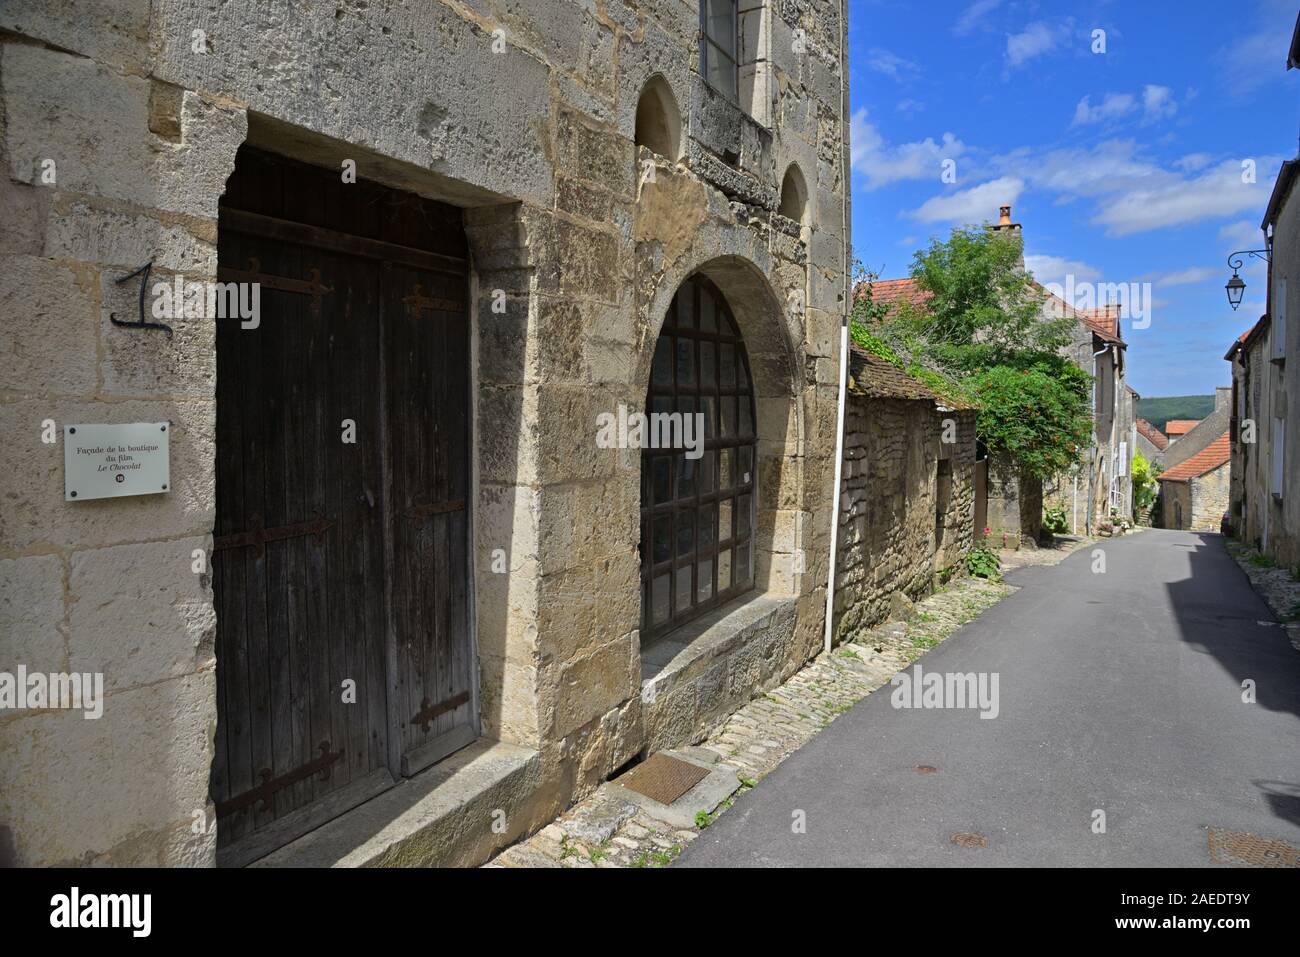 The original shooting location of the 2000 movie "Chocolat" in the picturesque village of Flavigny sur Ozerain, Cote d'Or FR Stock Photo